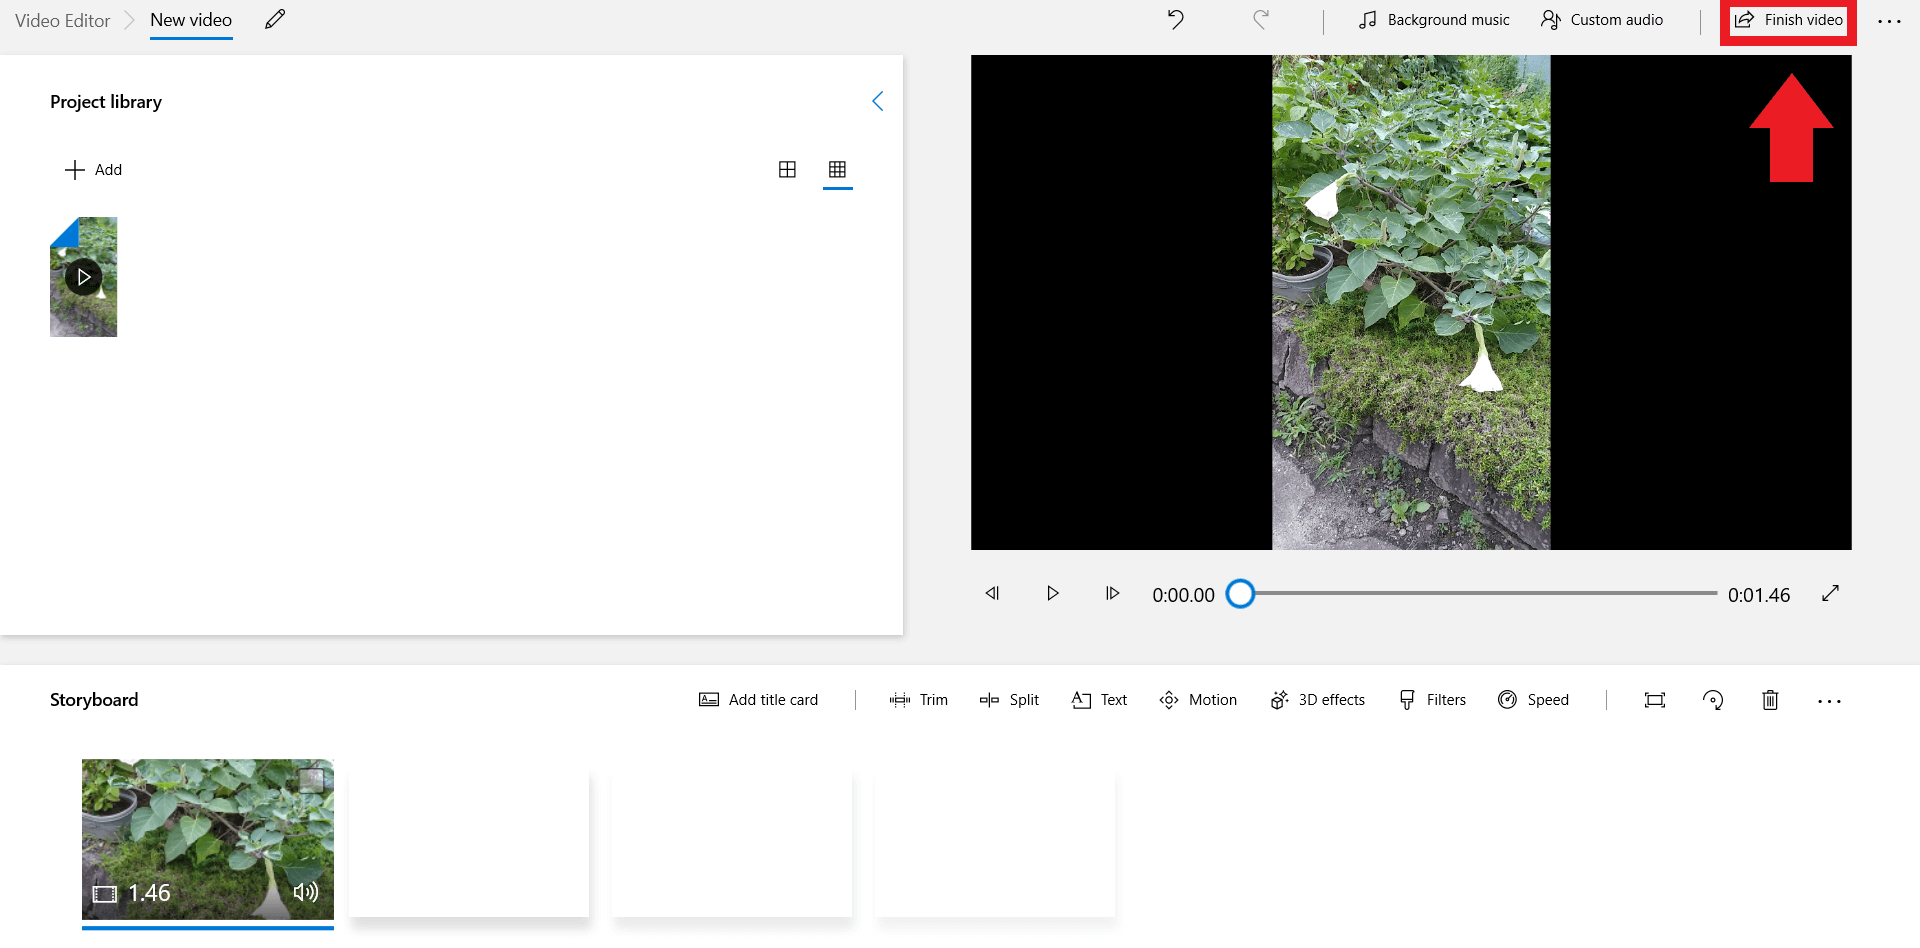 Save your video by selecting “Finish video”